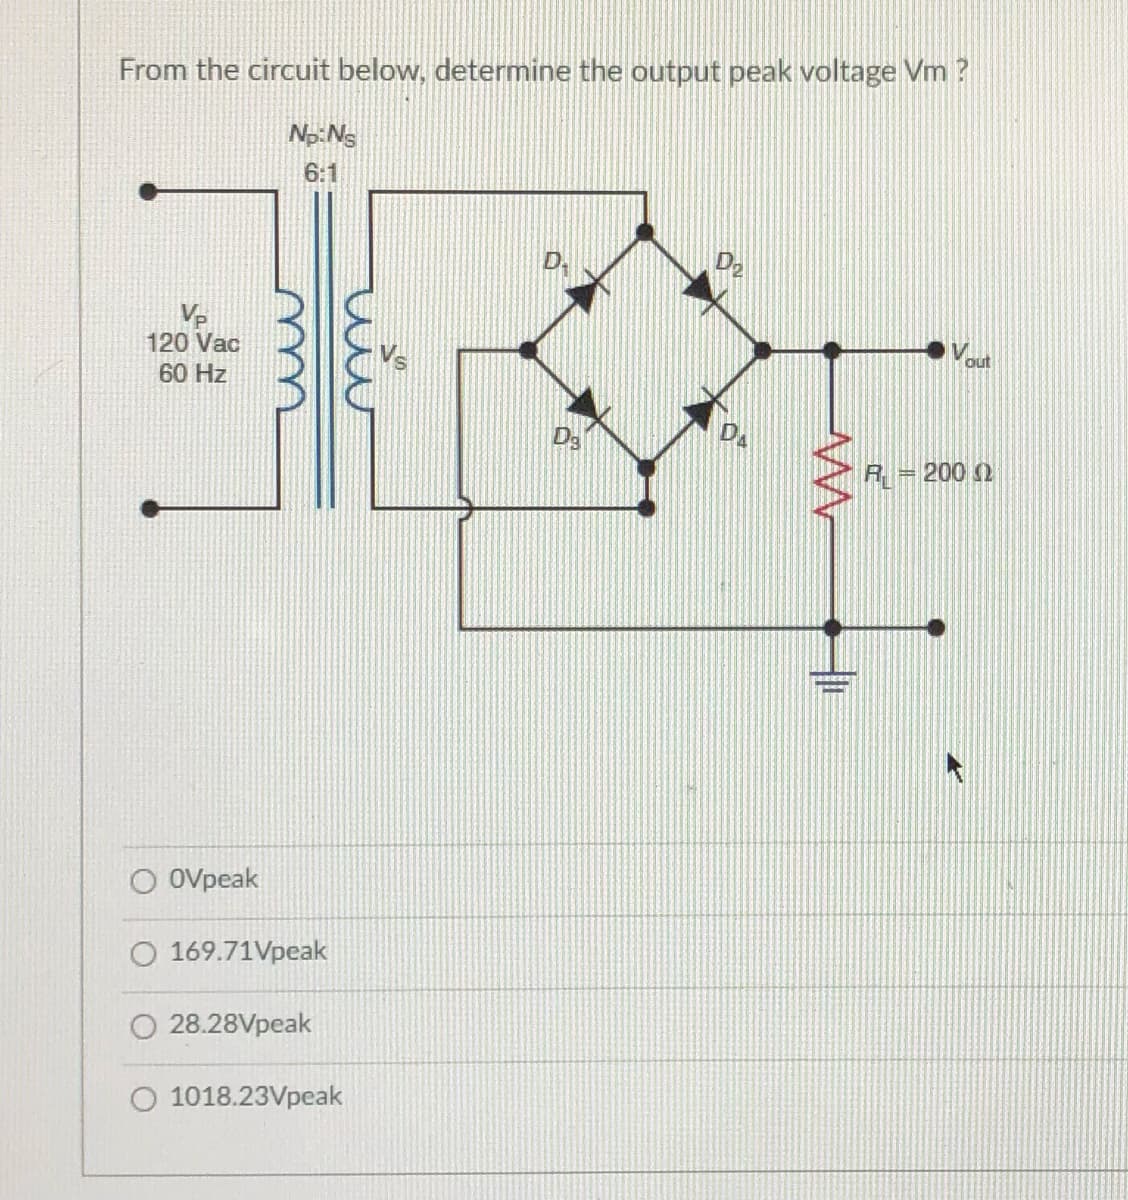 From the circuit below, determine the output peak voltage Vm ?
Np:Ns
6:1
Vp
120 Vac
out
60 Hz
DA
R = 200 2
O Ovpeak
O 169.71Vpeak
O 28.28Vpeak
O 1018.23Vpeak
